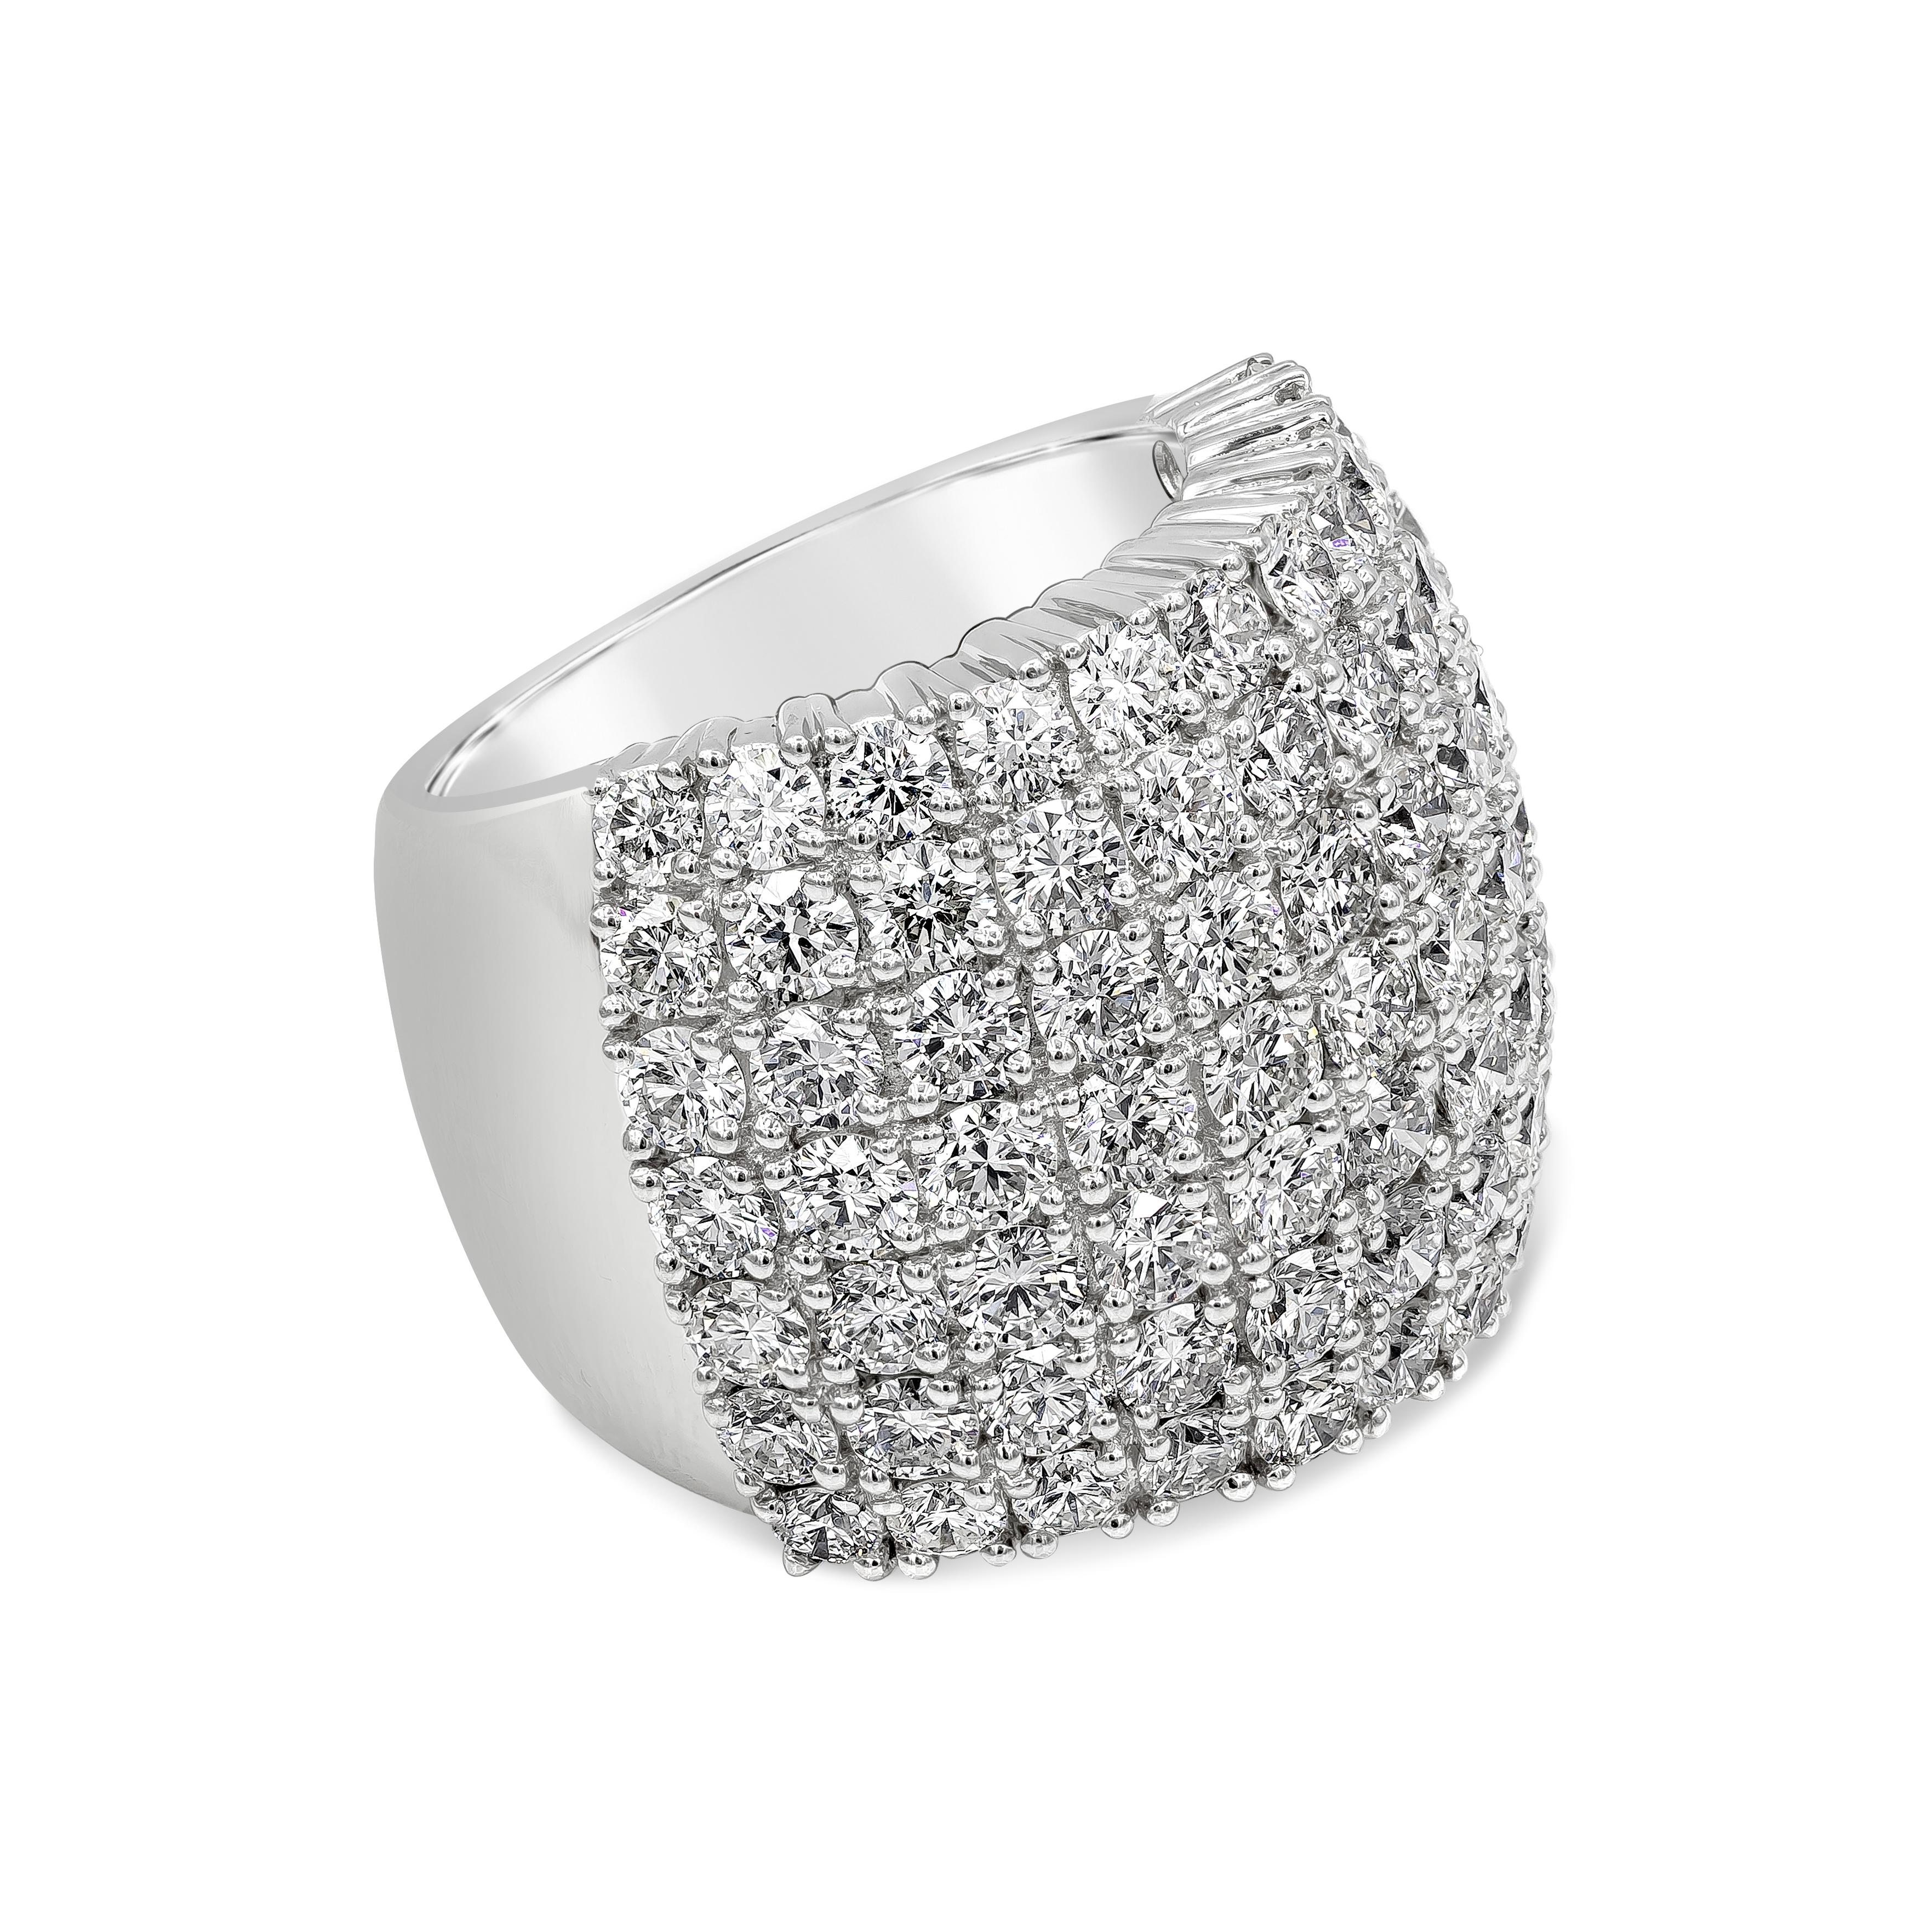 An immense wide cocktail ring featuring dazzling brilliant round diamonds weighing 6.73 carats total, set in a wide multi-row pave curved design band. Finely made in 18K White Gold. Size 7.25 US resizable upon request and 20.25mm in width.

Style